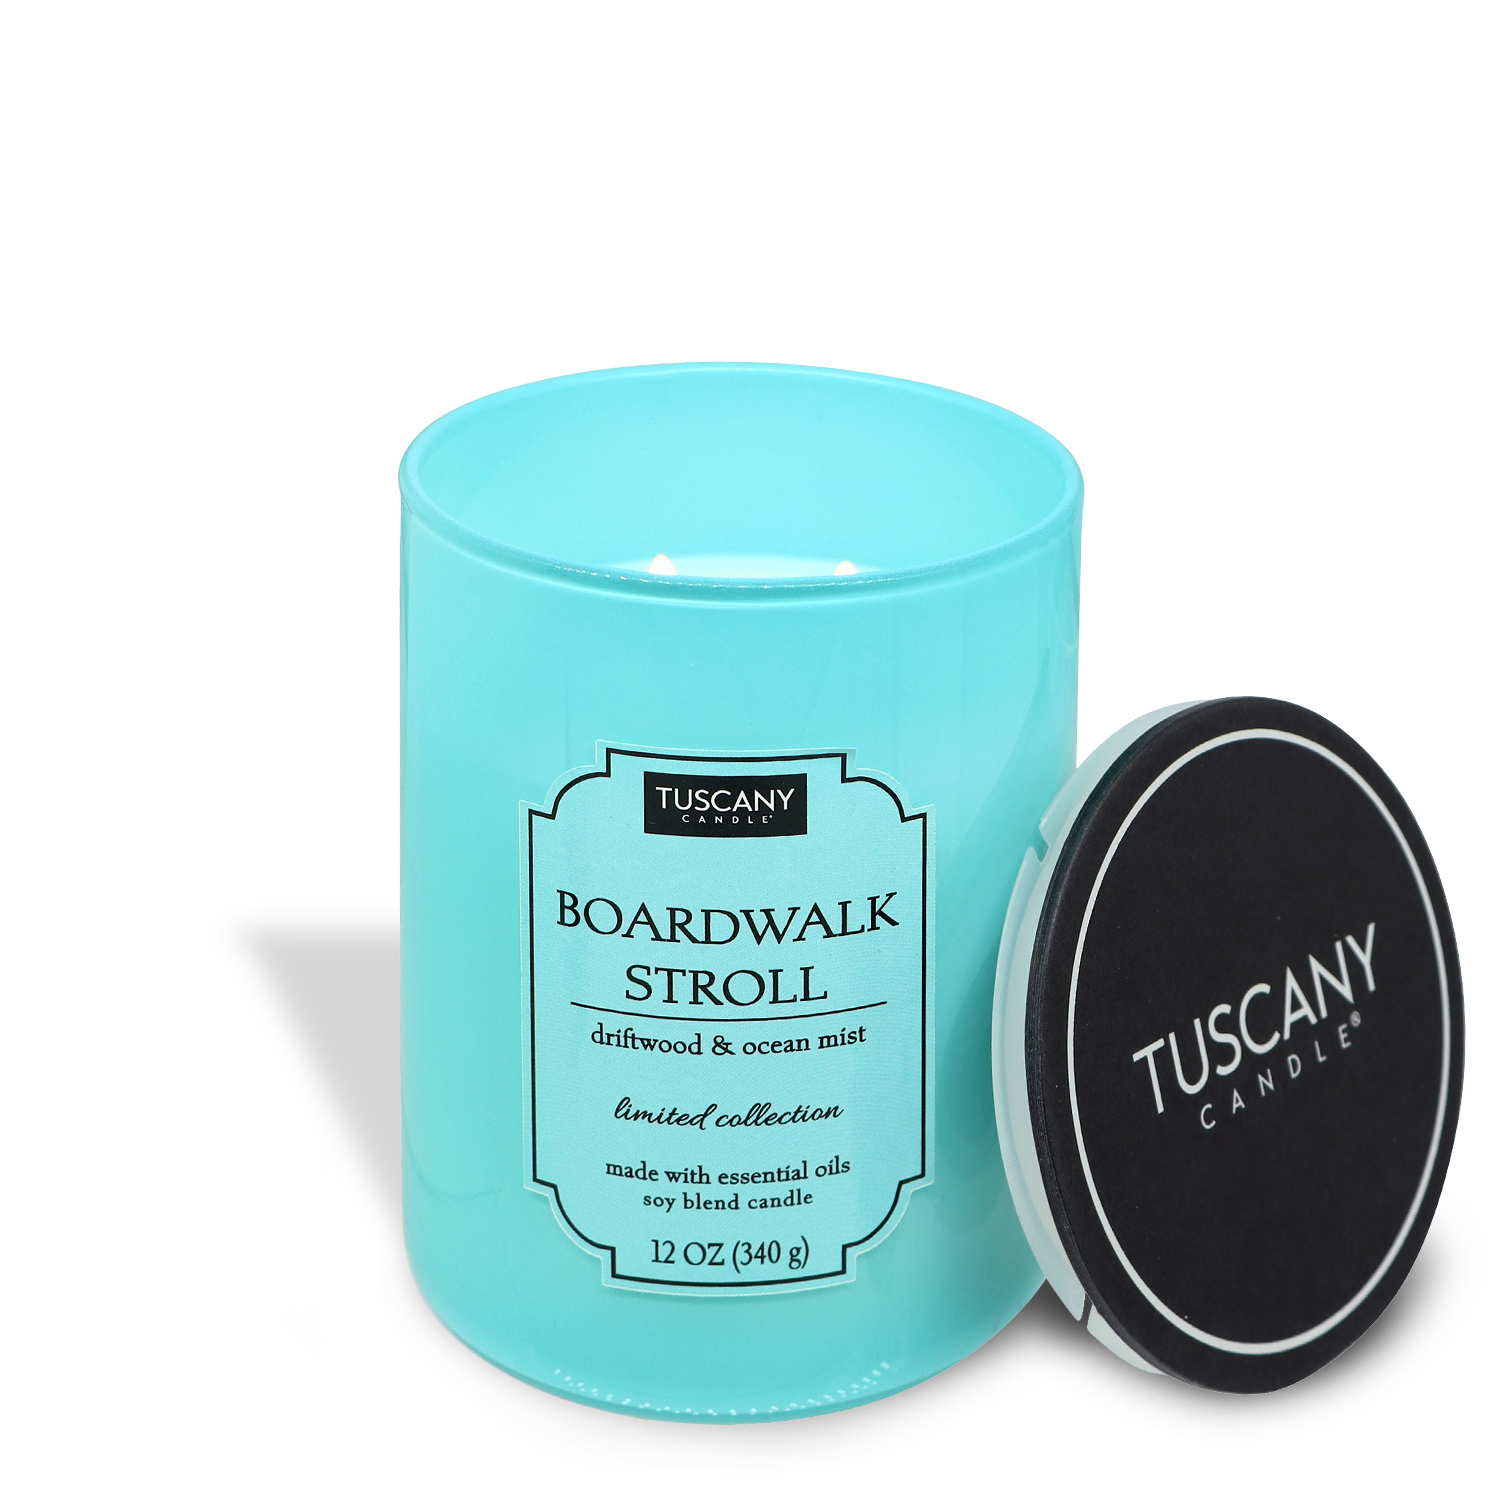 Turquoise "Boardwalk Stroll (12 oz) – Colorsplash Collection" scented candle by Tuscany Candle®, featuring driftwood and ocean mist fragrance, displayed with its black lid to the side.